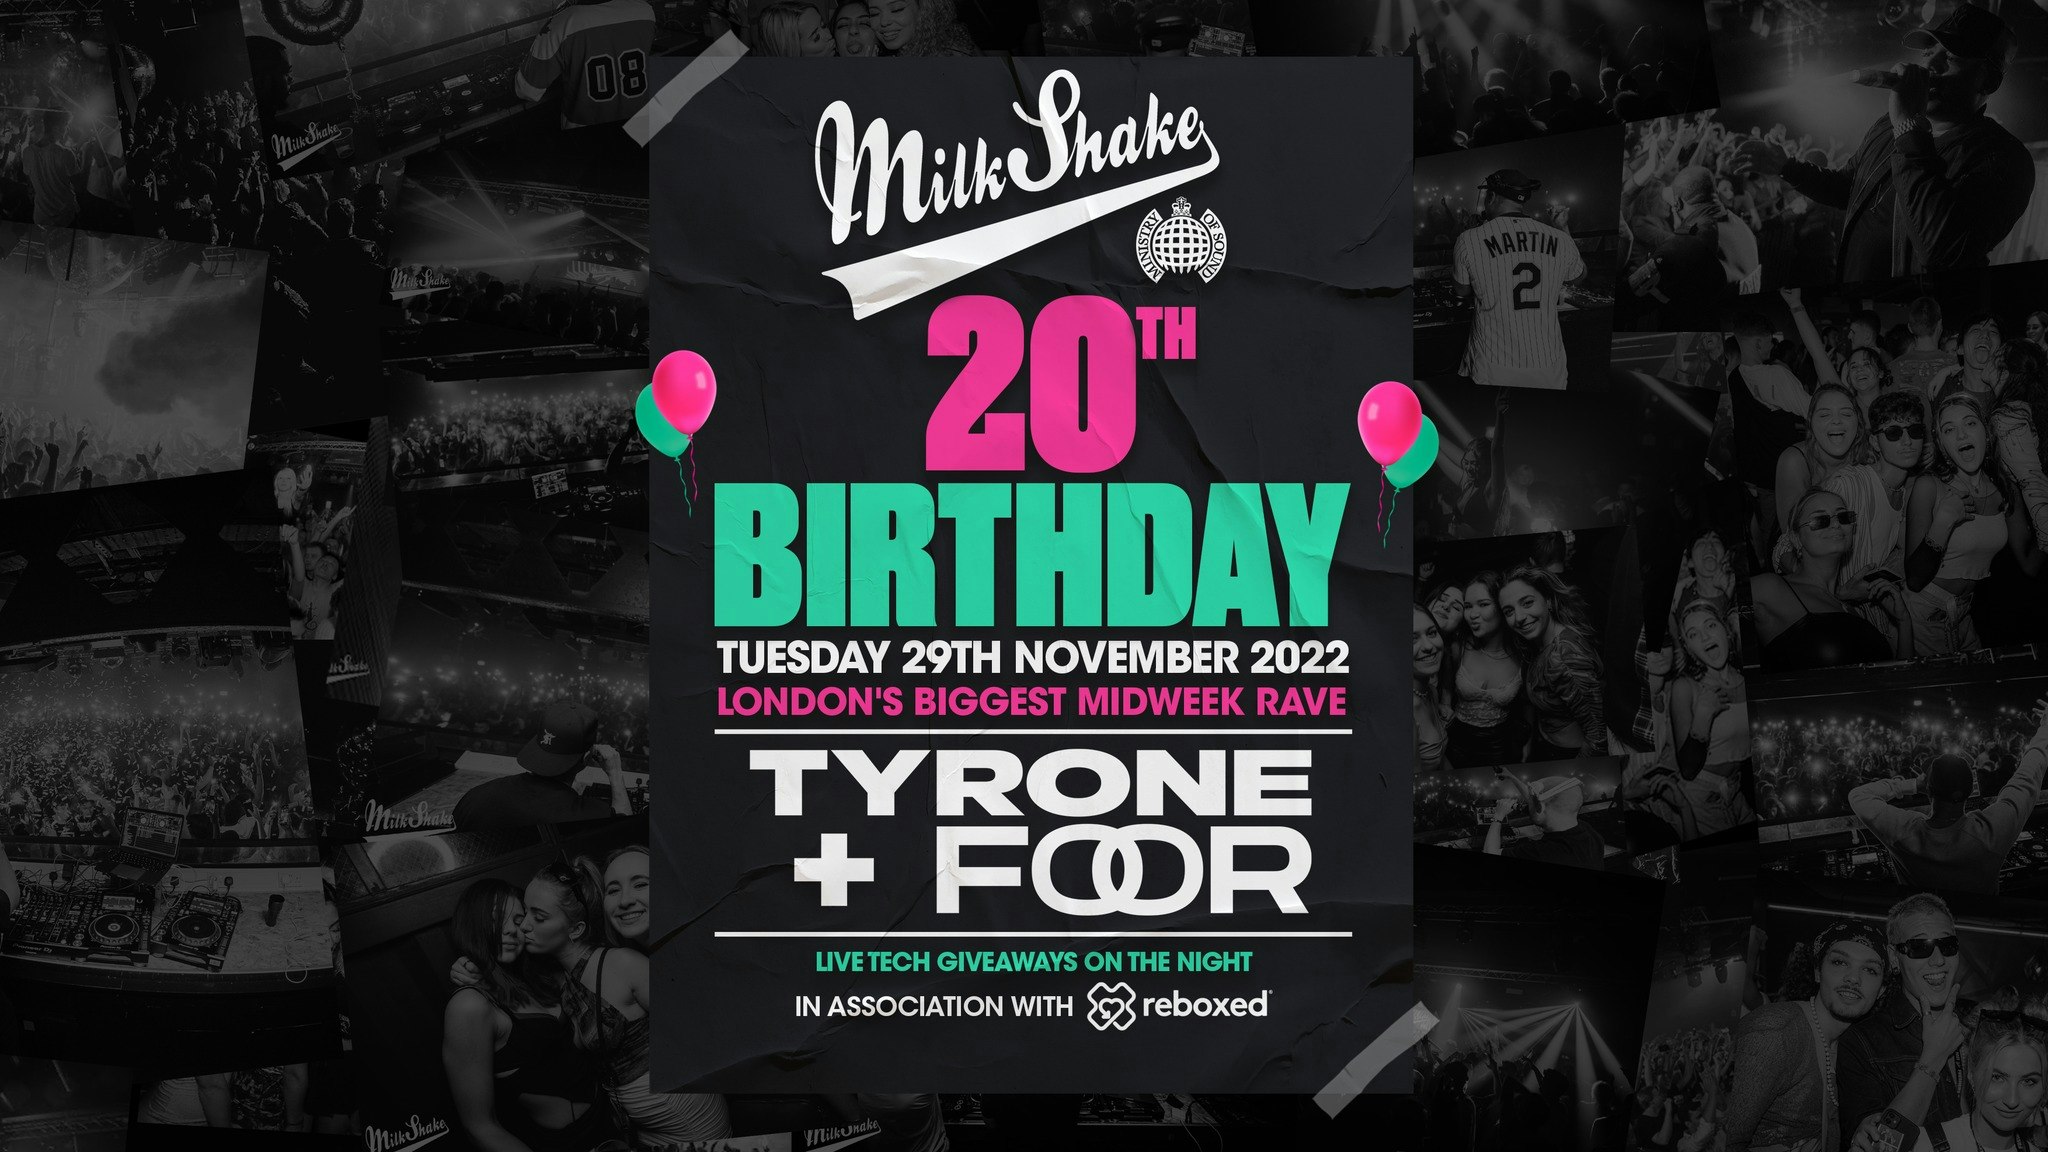 🎂 SOLD OUT 🎂 Ministry of Sound, Milkshake – Official 20th Birthday Event 🎈